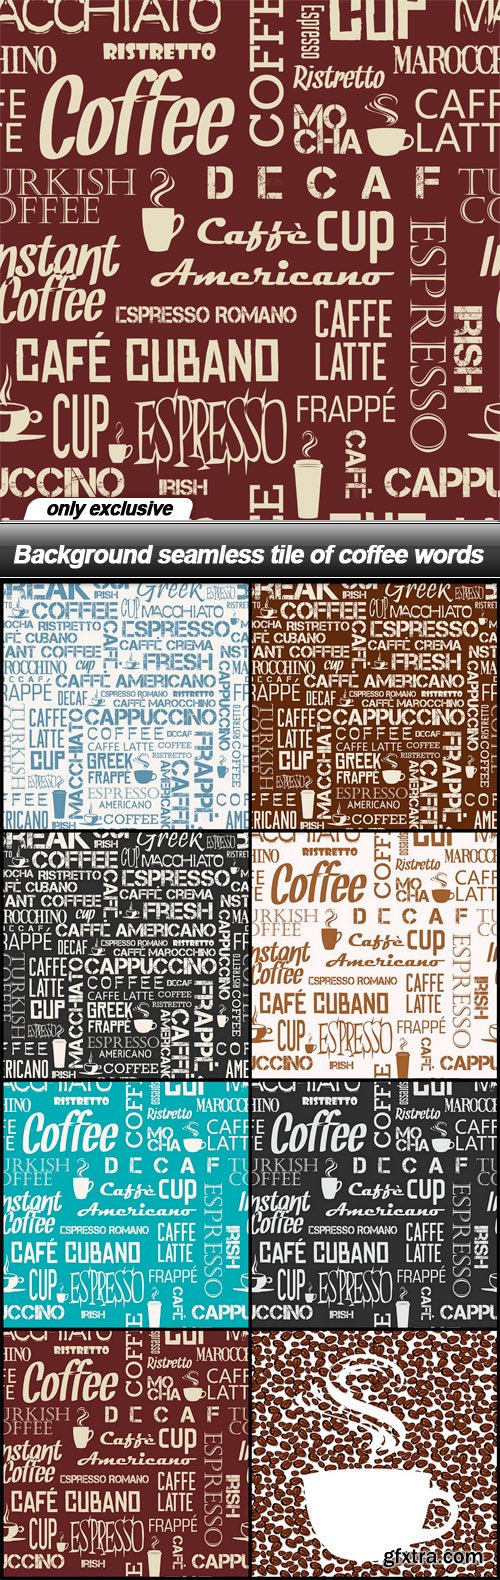 Background seamless tile of coffee words - 8 EPS